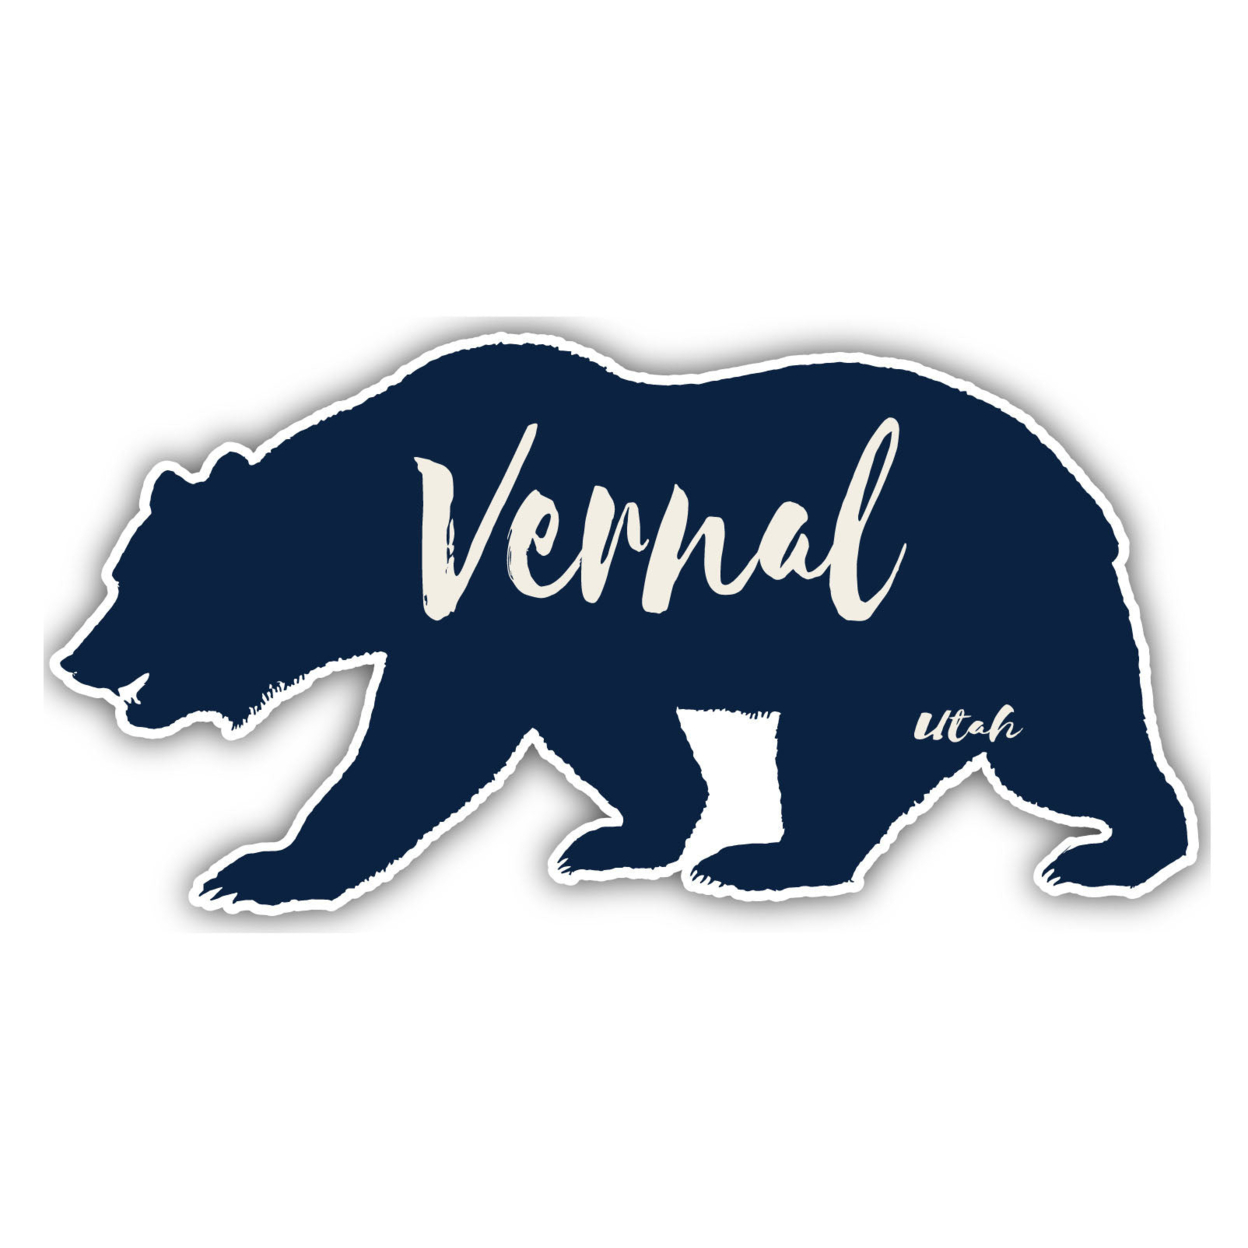 Vernal Utah Souvenir Decorative Stickers (Choose Theme And Size) - Single Unit, 4-Inch, Great Outdoors